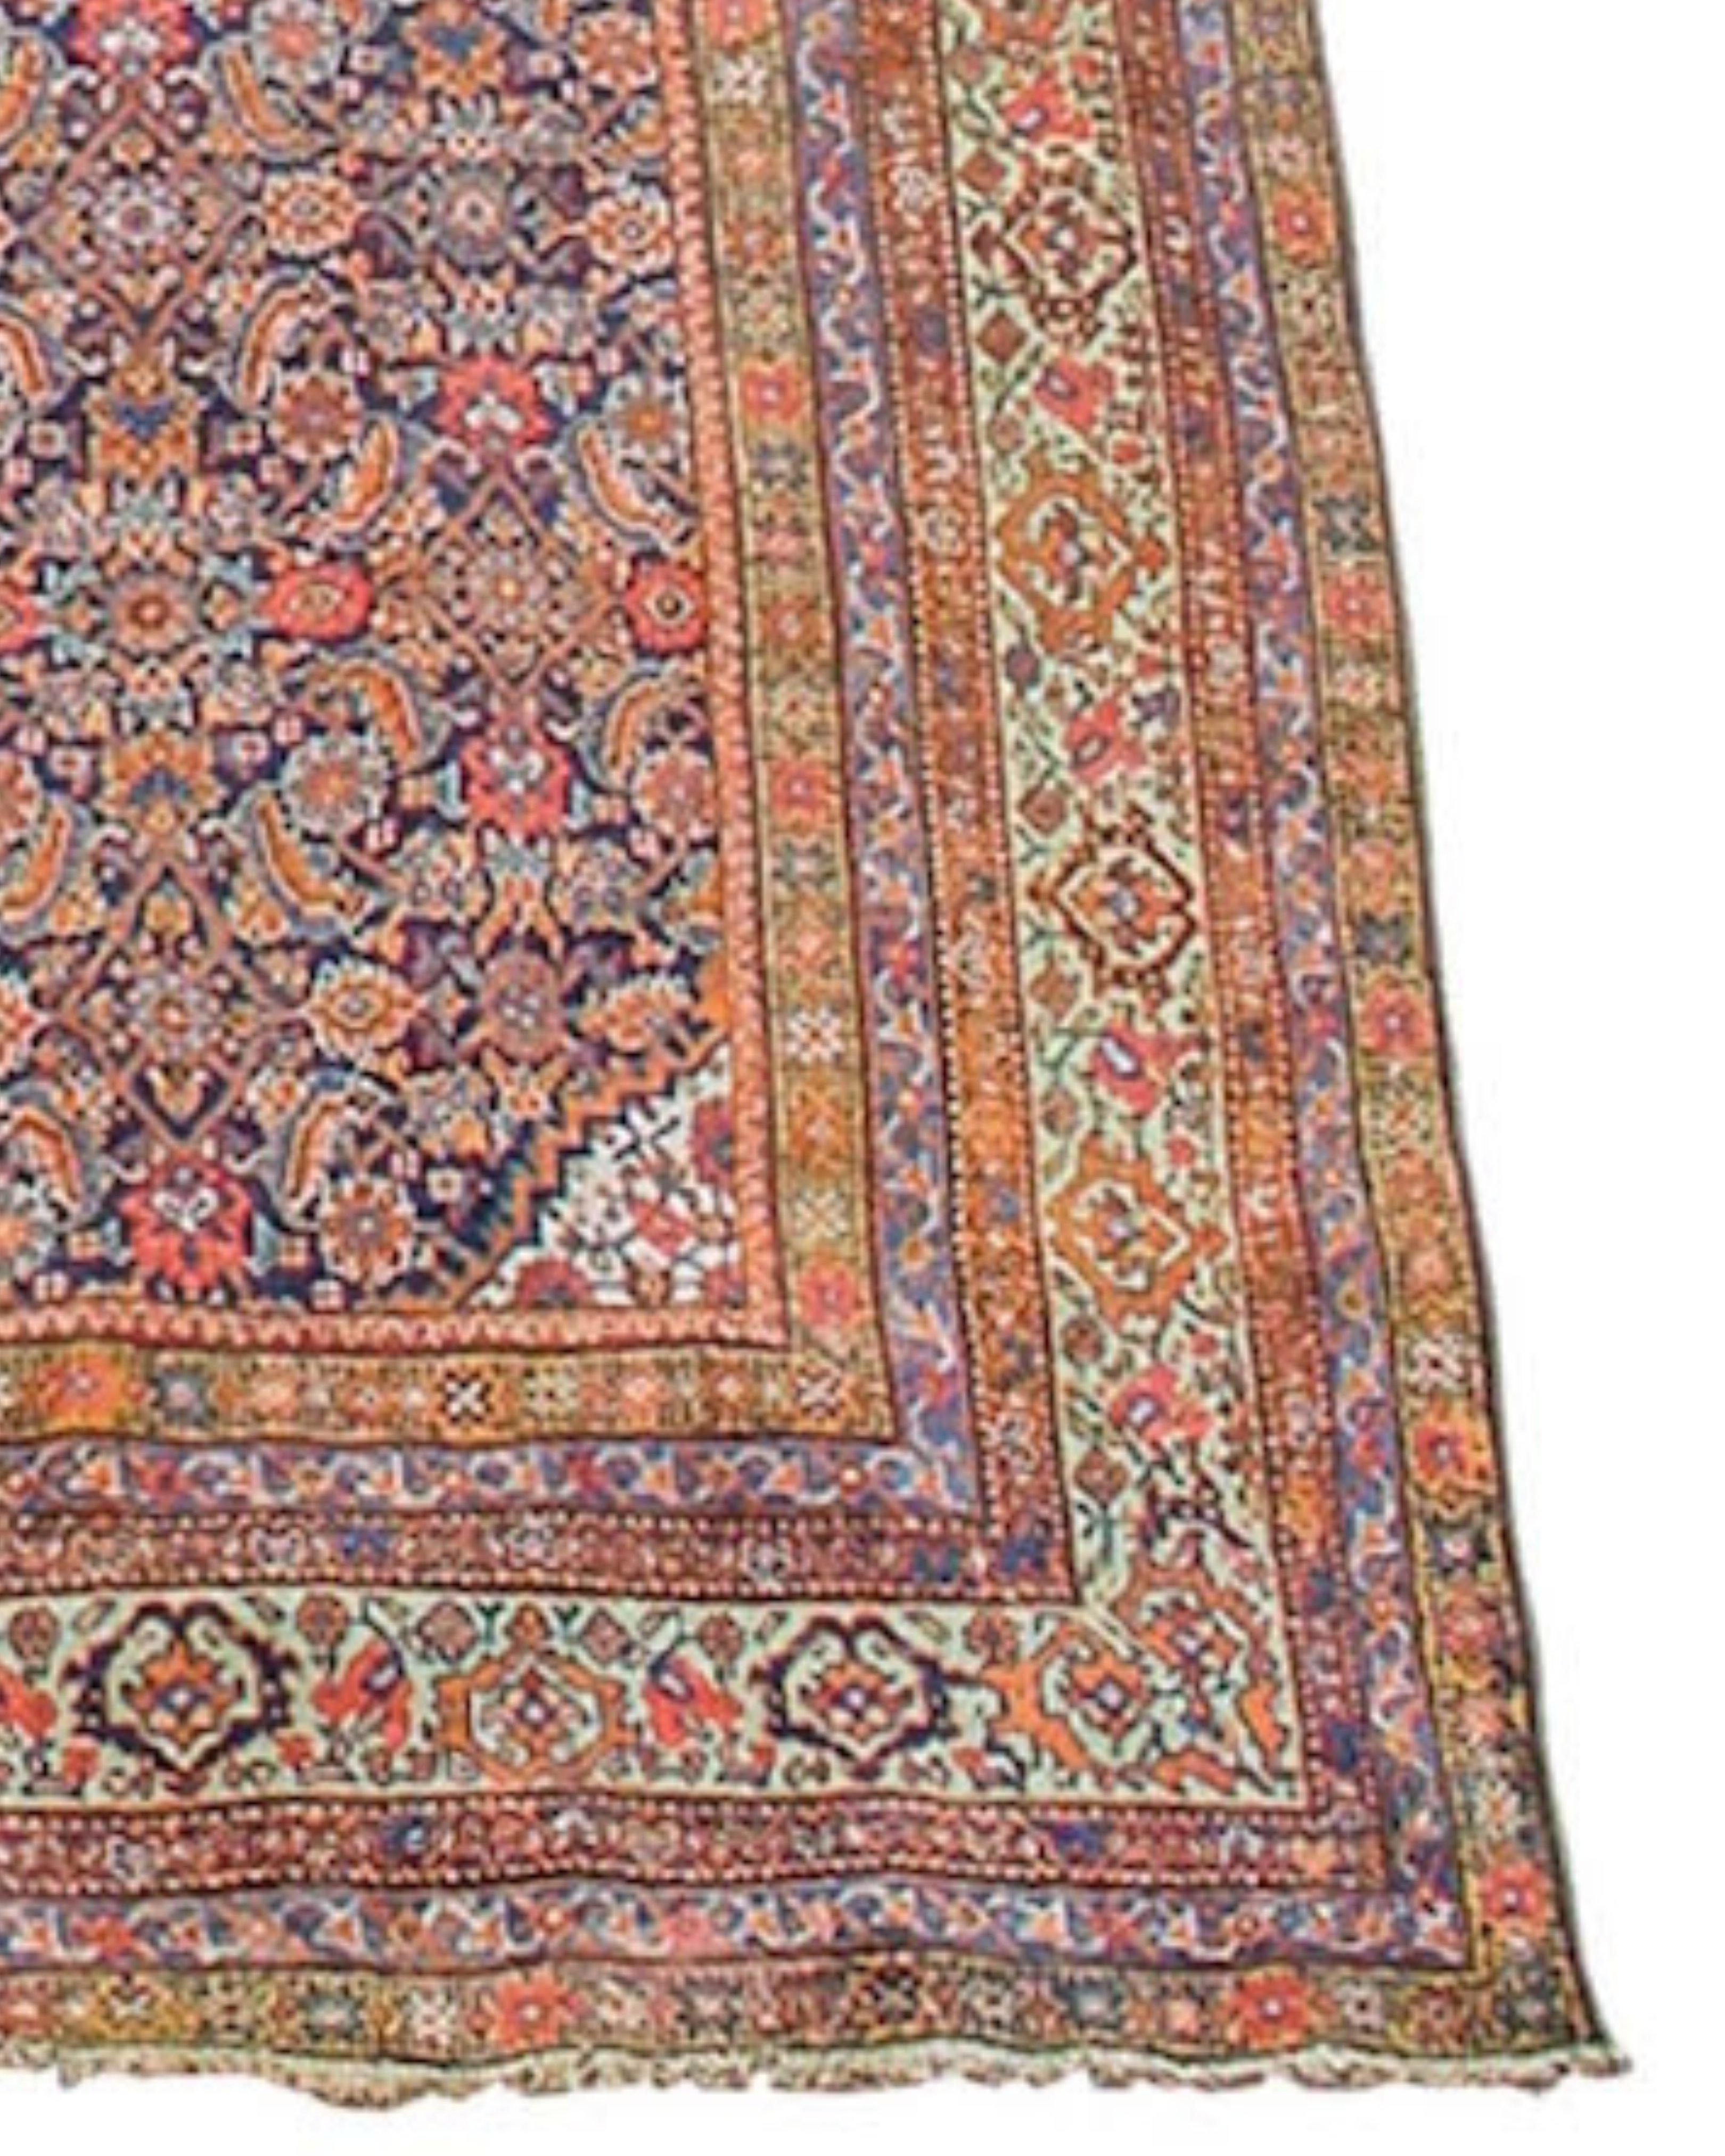 Antique Large Persian Fereghan Rug, 19th Century In Excellent Condition For Sale In San Francisco, CA